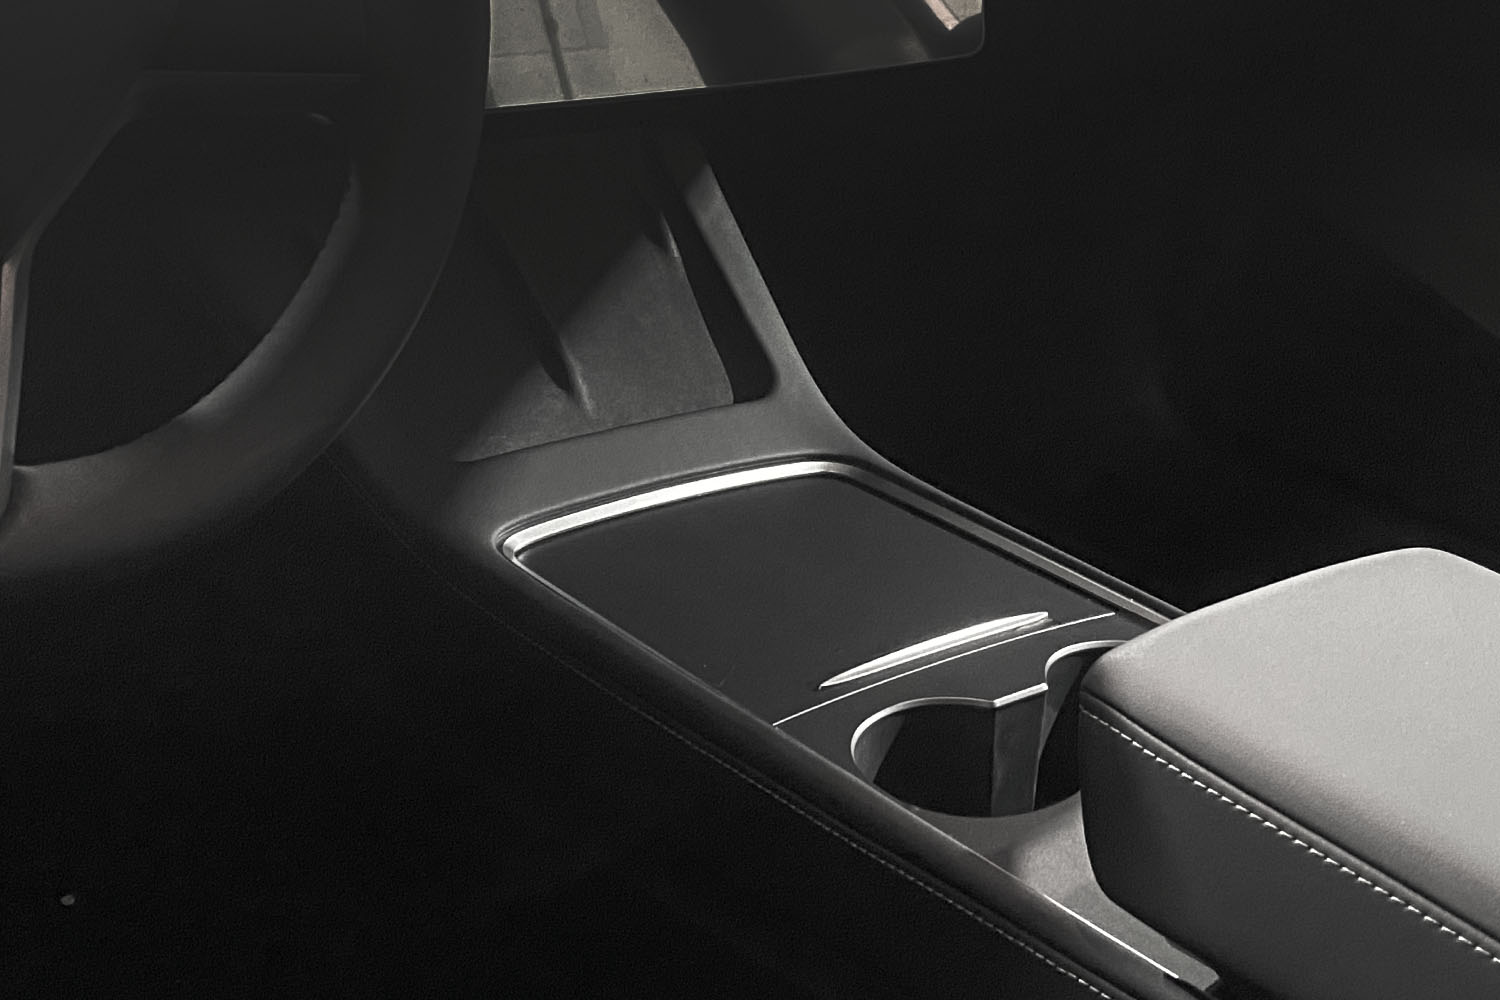 2021 tesla model 3 center console wraps now available save 10 deal